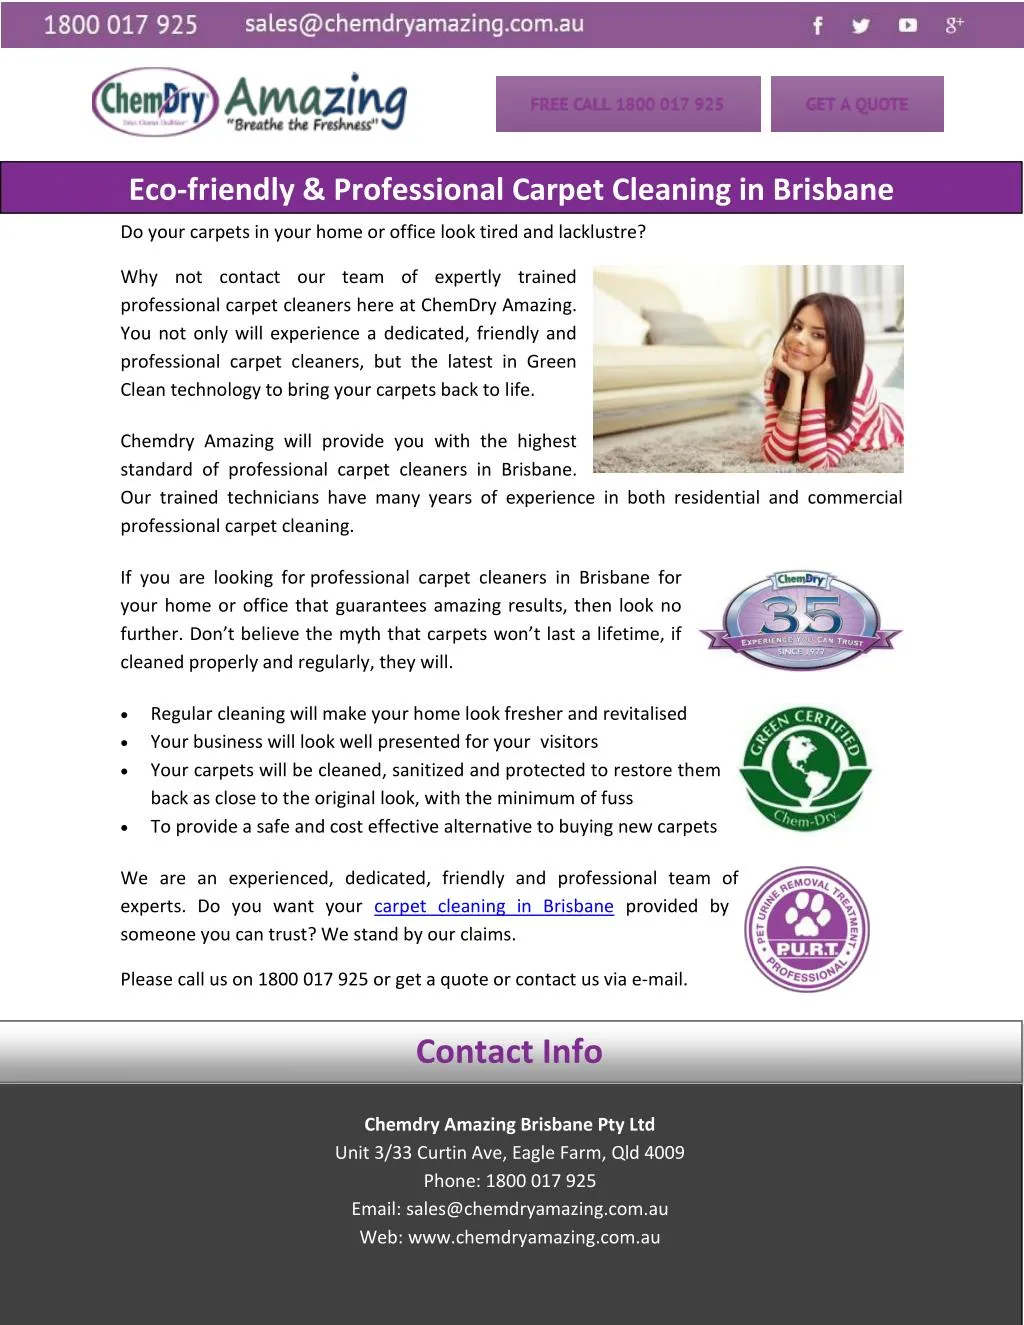 eco friendly professional carpet cleaning